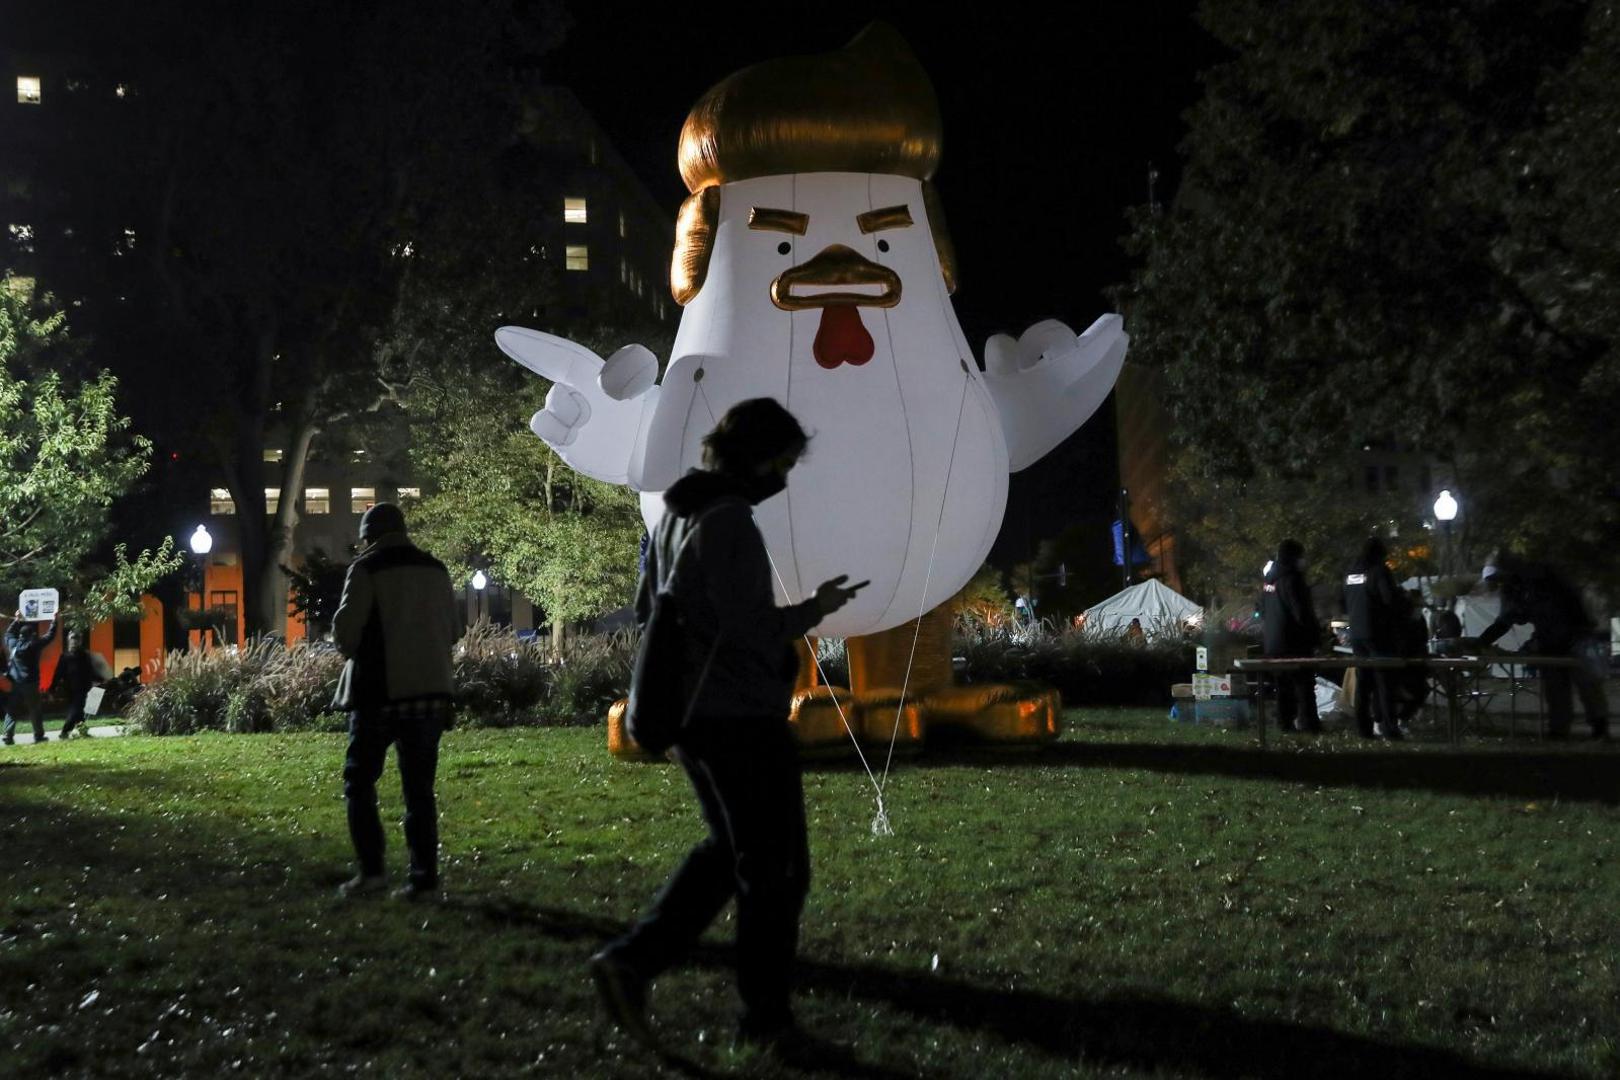 2020 U.S. election in Washington People walk past an inflatable chicken resembling U.S. President Donald Trump during Election Day at McPherson Square in downtown Washington, U.S.,  November 3, 2020. REUTERS/Leah Millis LEAH MILLIS